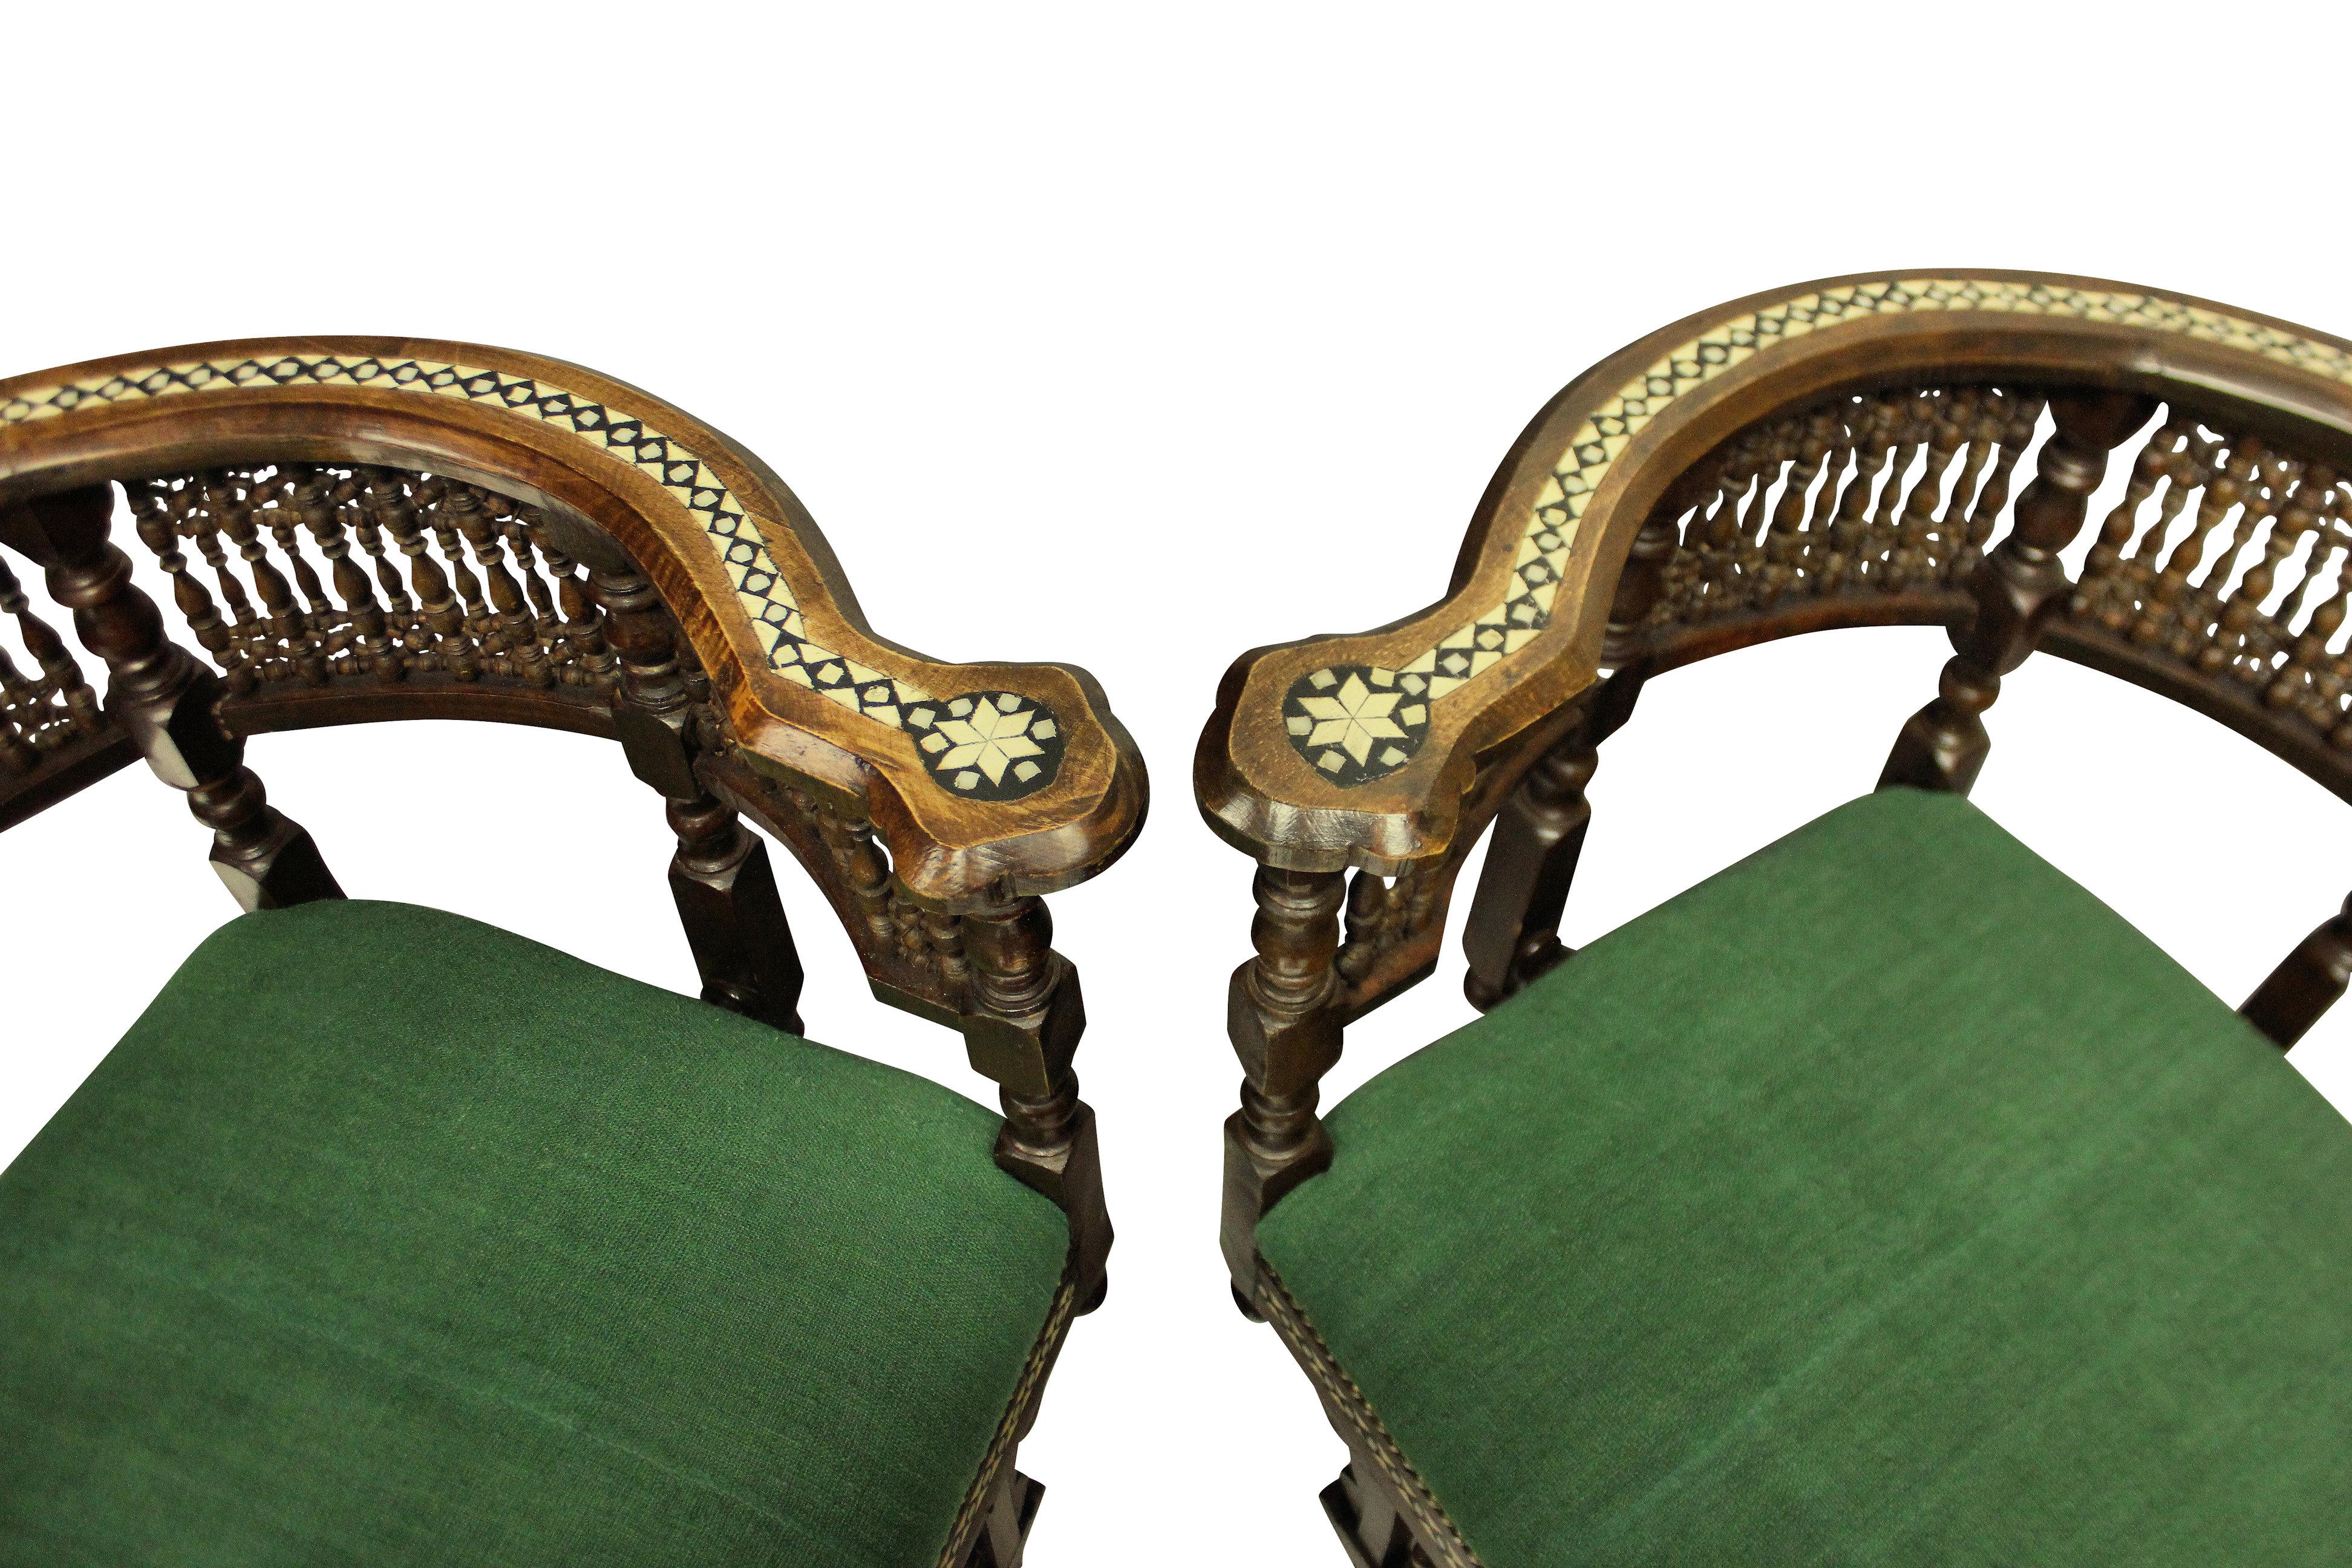 A pair of finely carved Moorish corner armchairs in hardwood and inlaid with bone and ebony. Newly upholstered in 19th century green French linen.